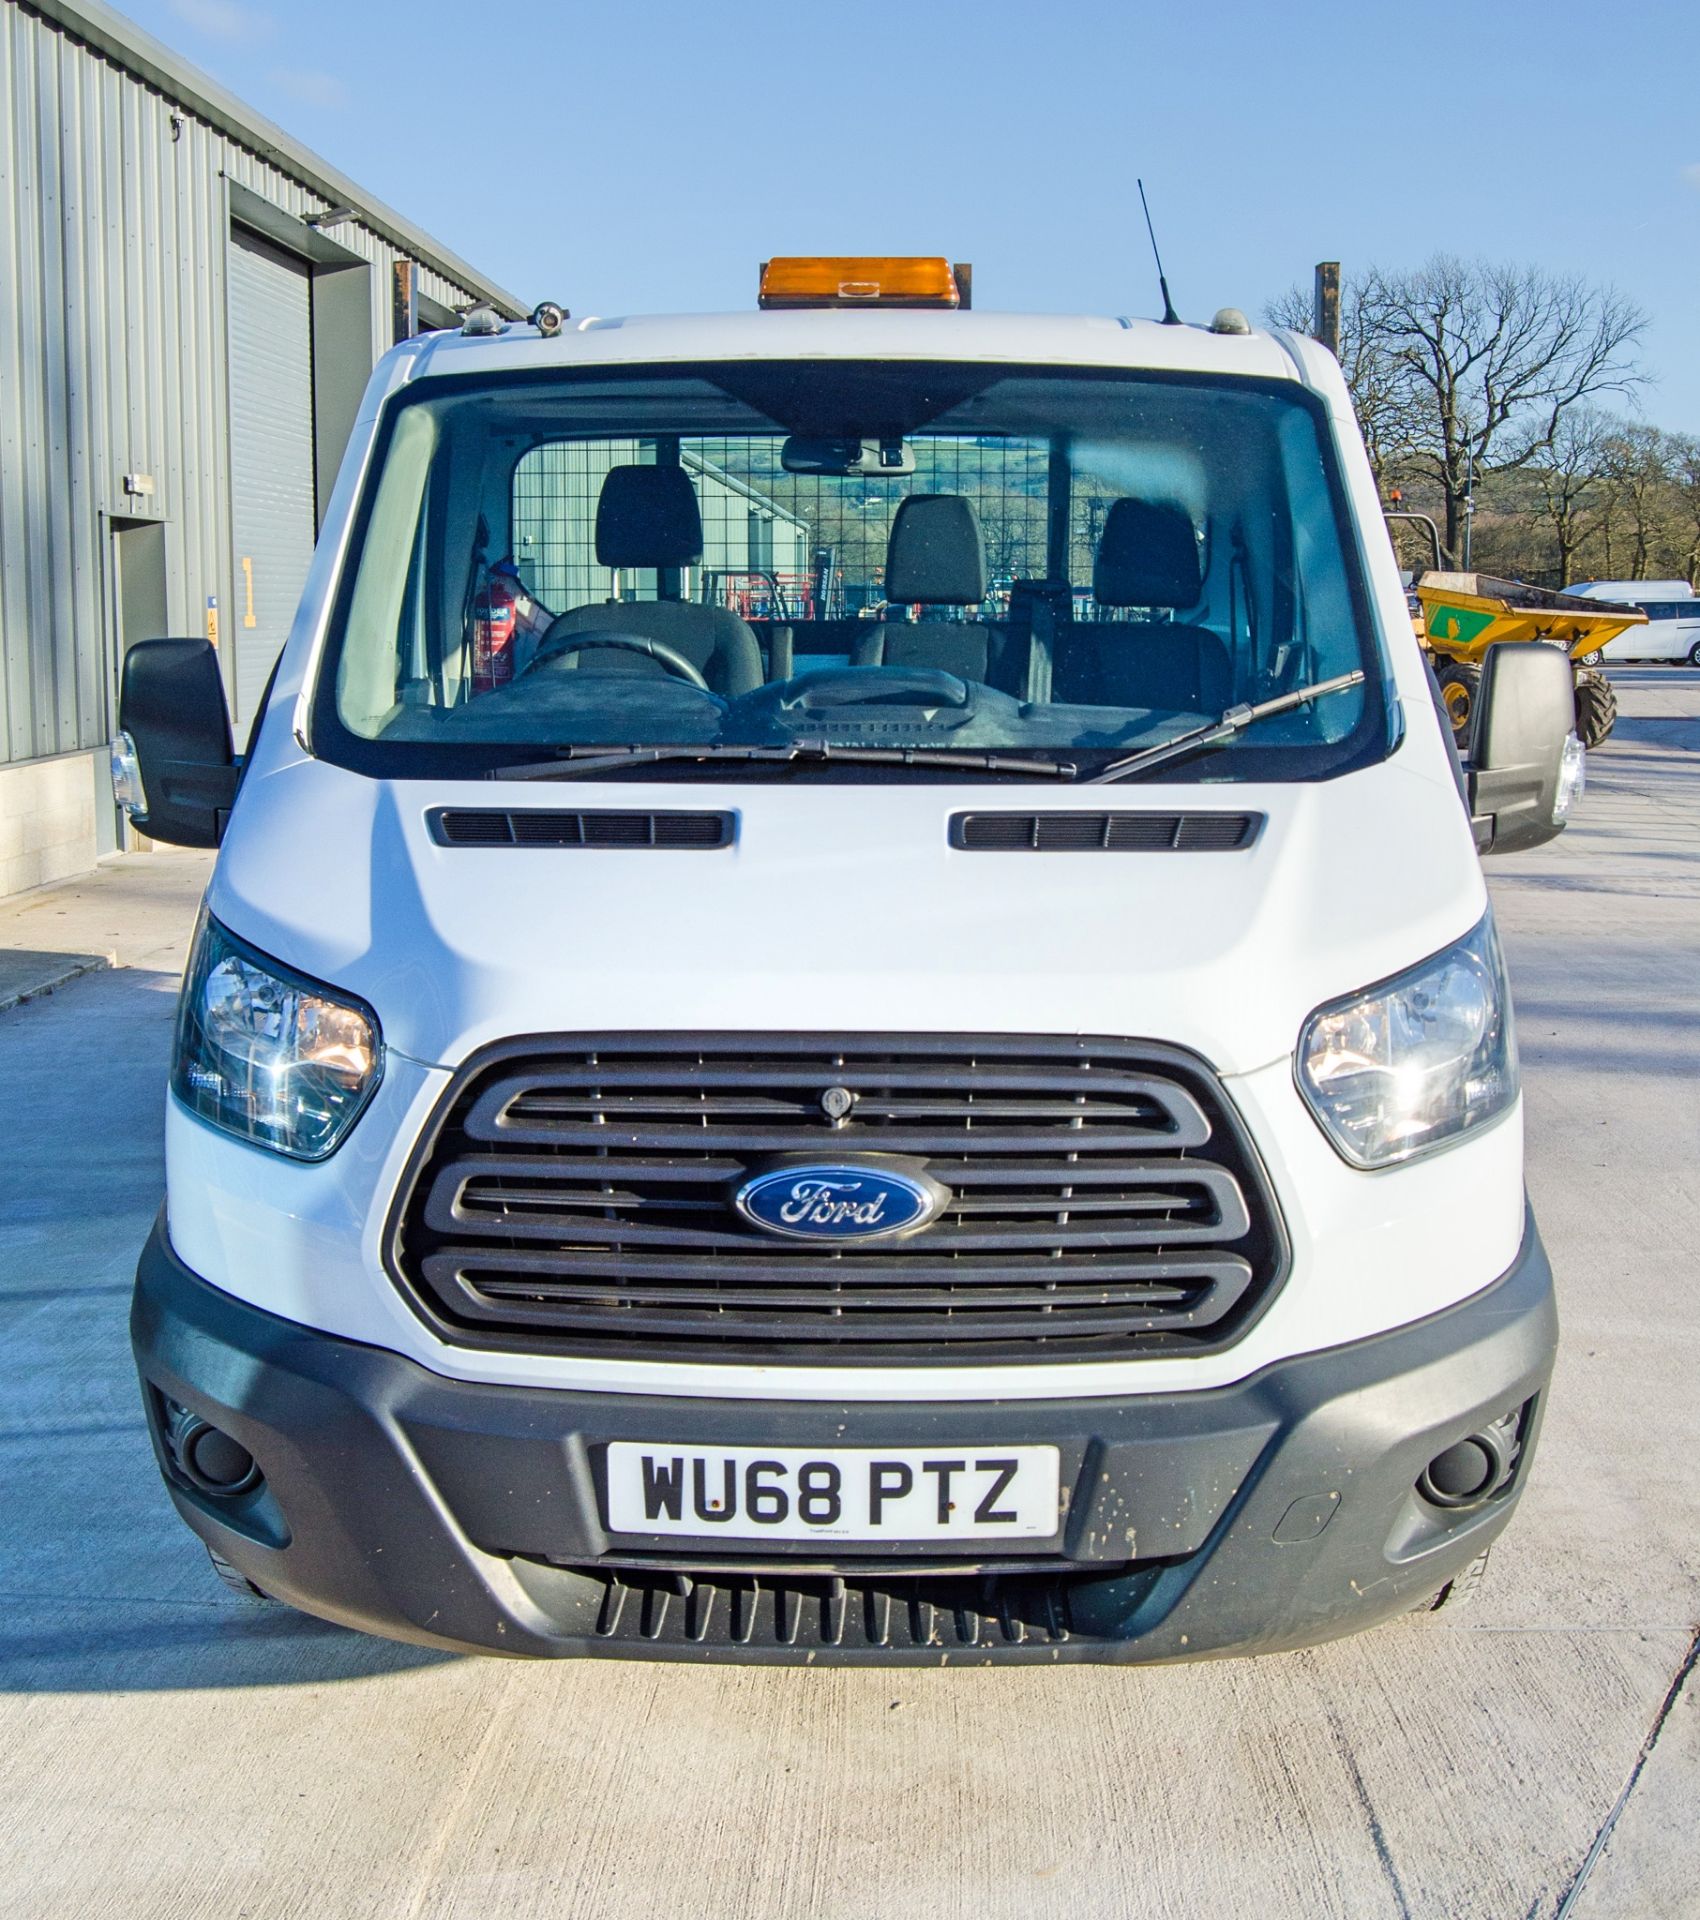 Ford Transit 350 Euro 6 2 litre diesel 6 speed manual tipper Registration Number: WU68 PTZ Date of - Image 5 of 37